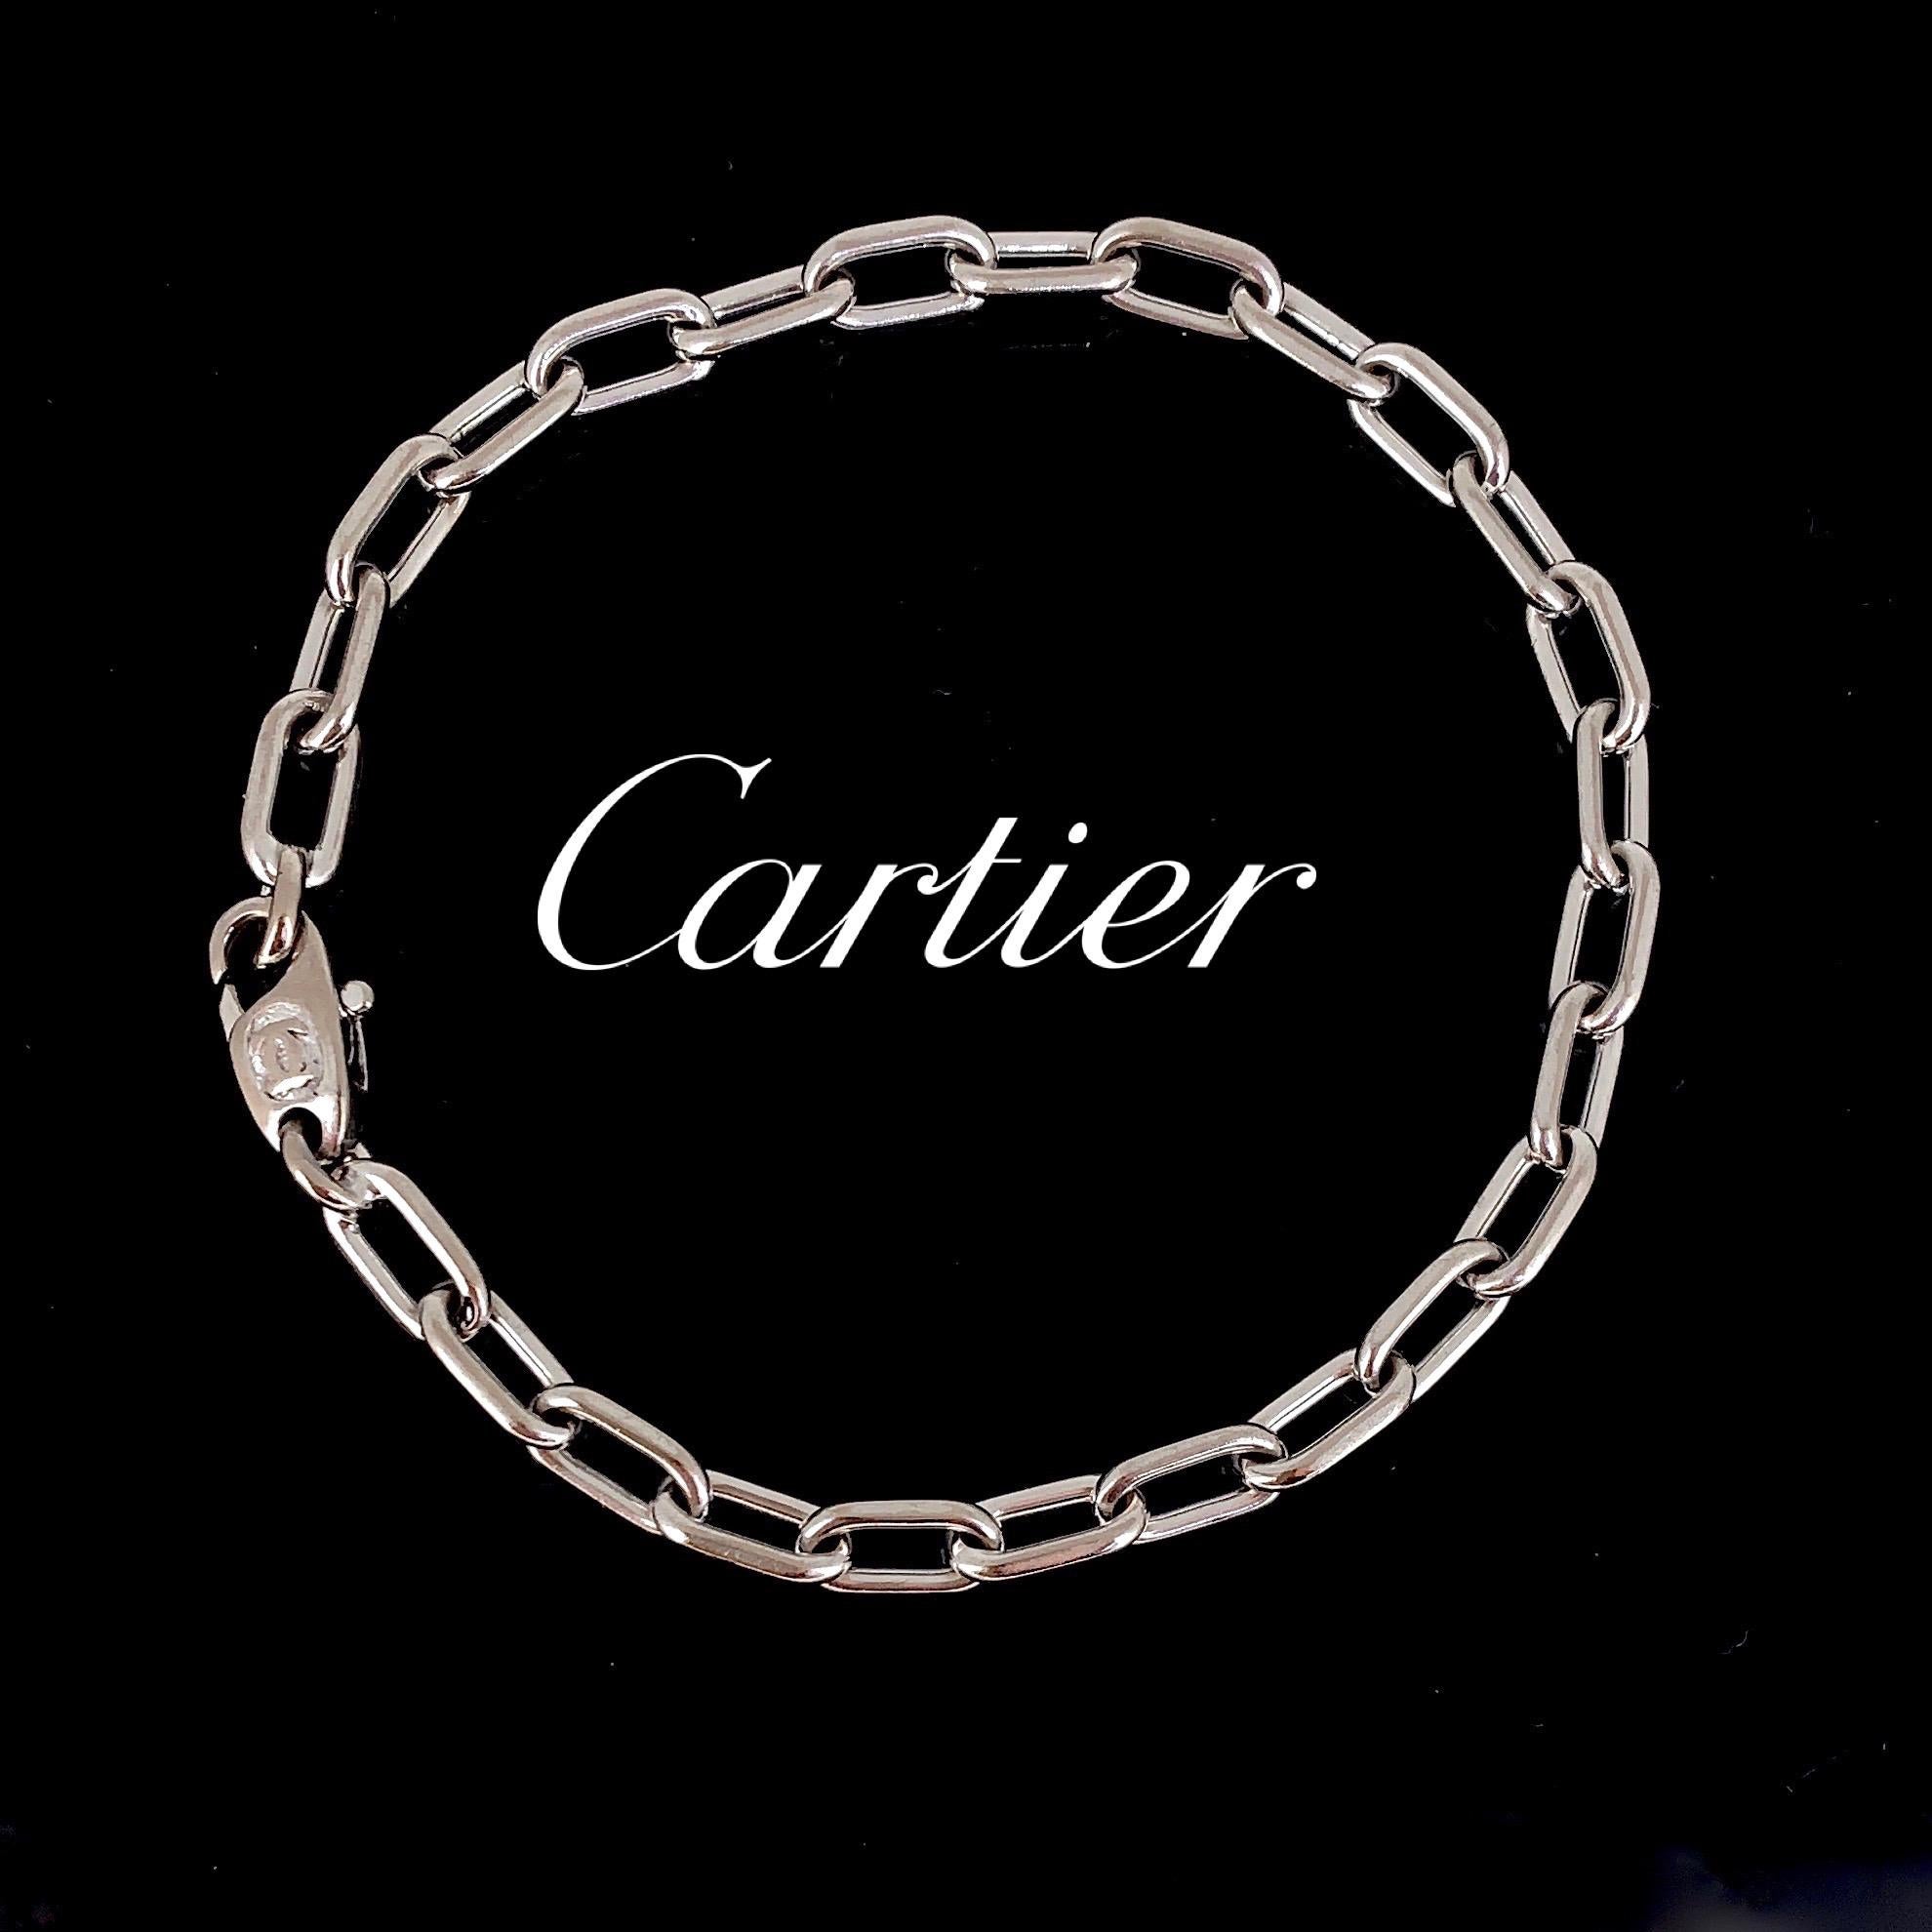 Women's or Men's Cartier Spartacus White Gold Chain Bracelet with Certificate